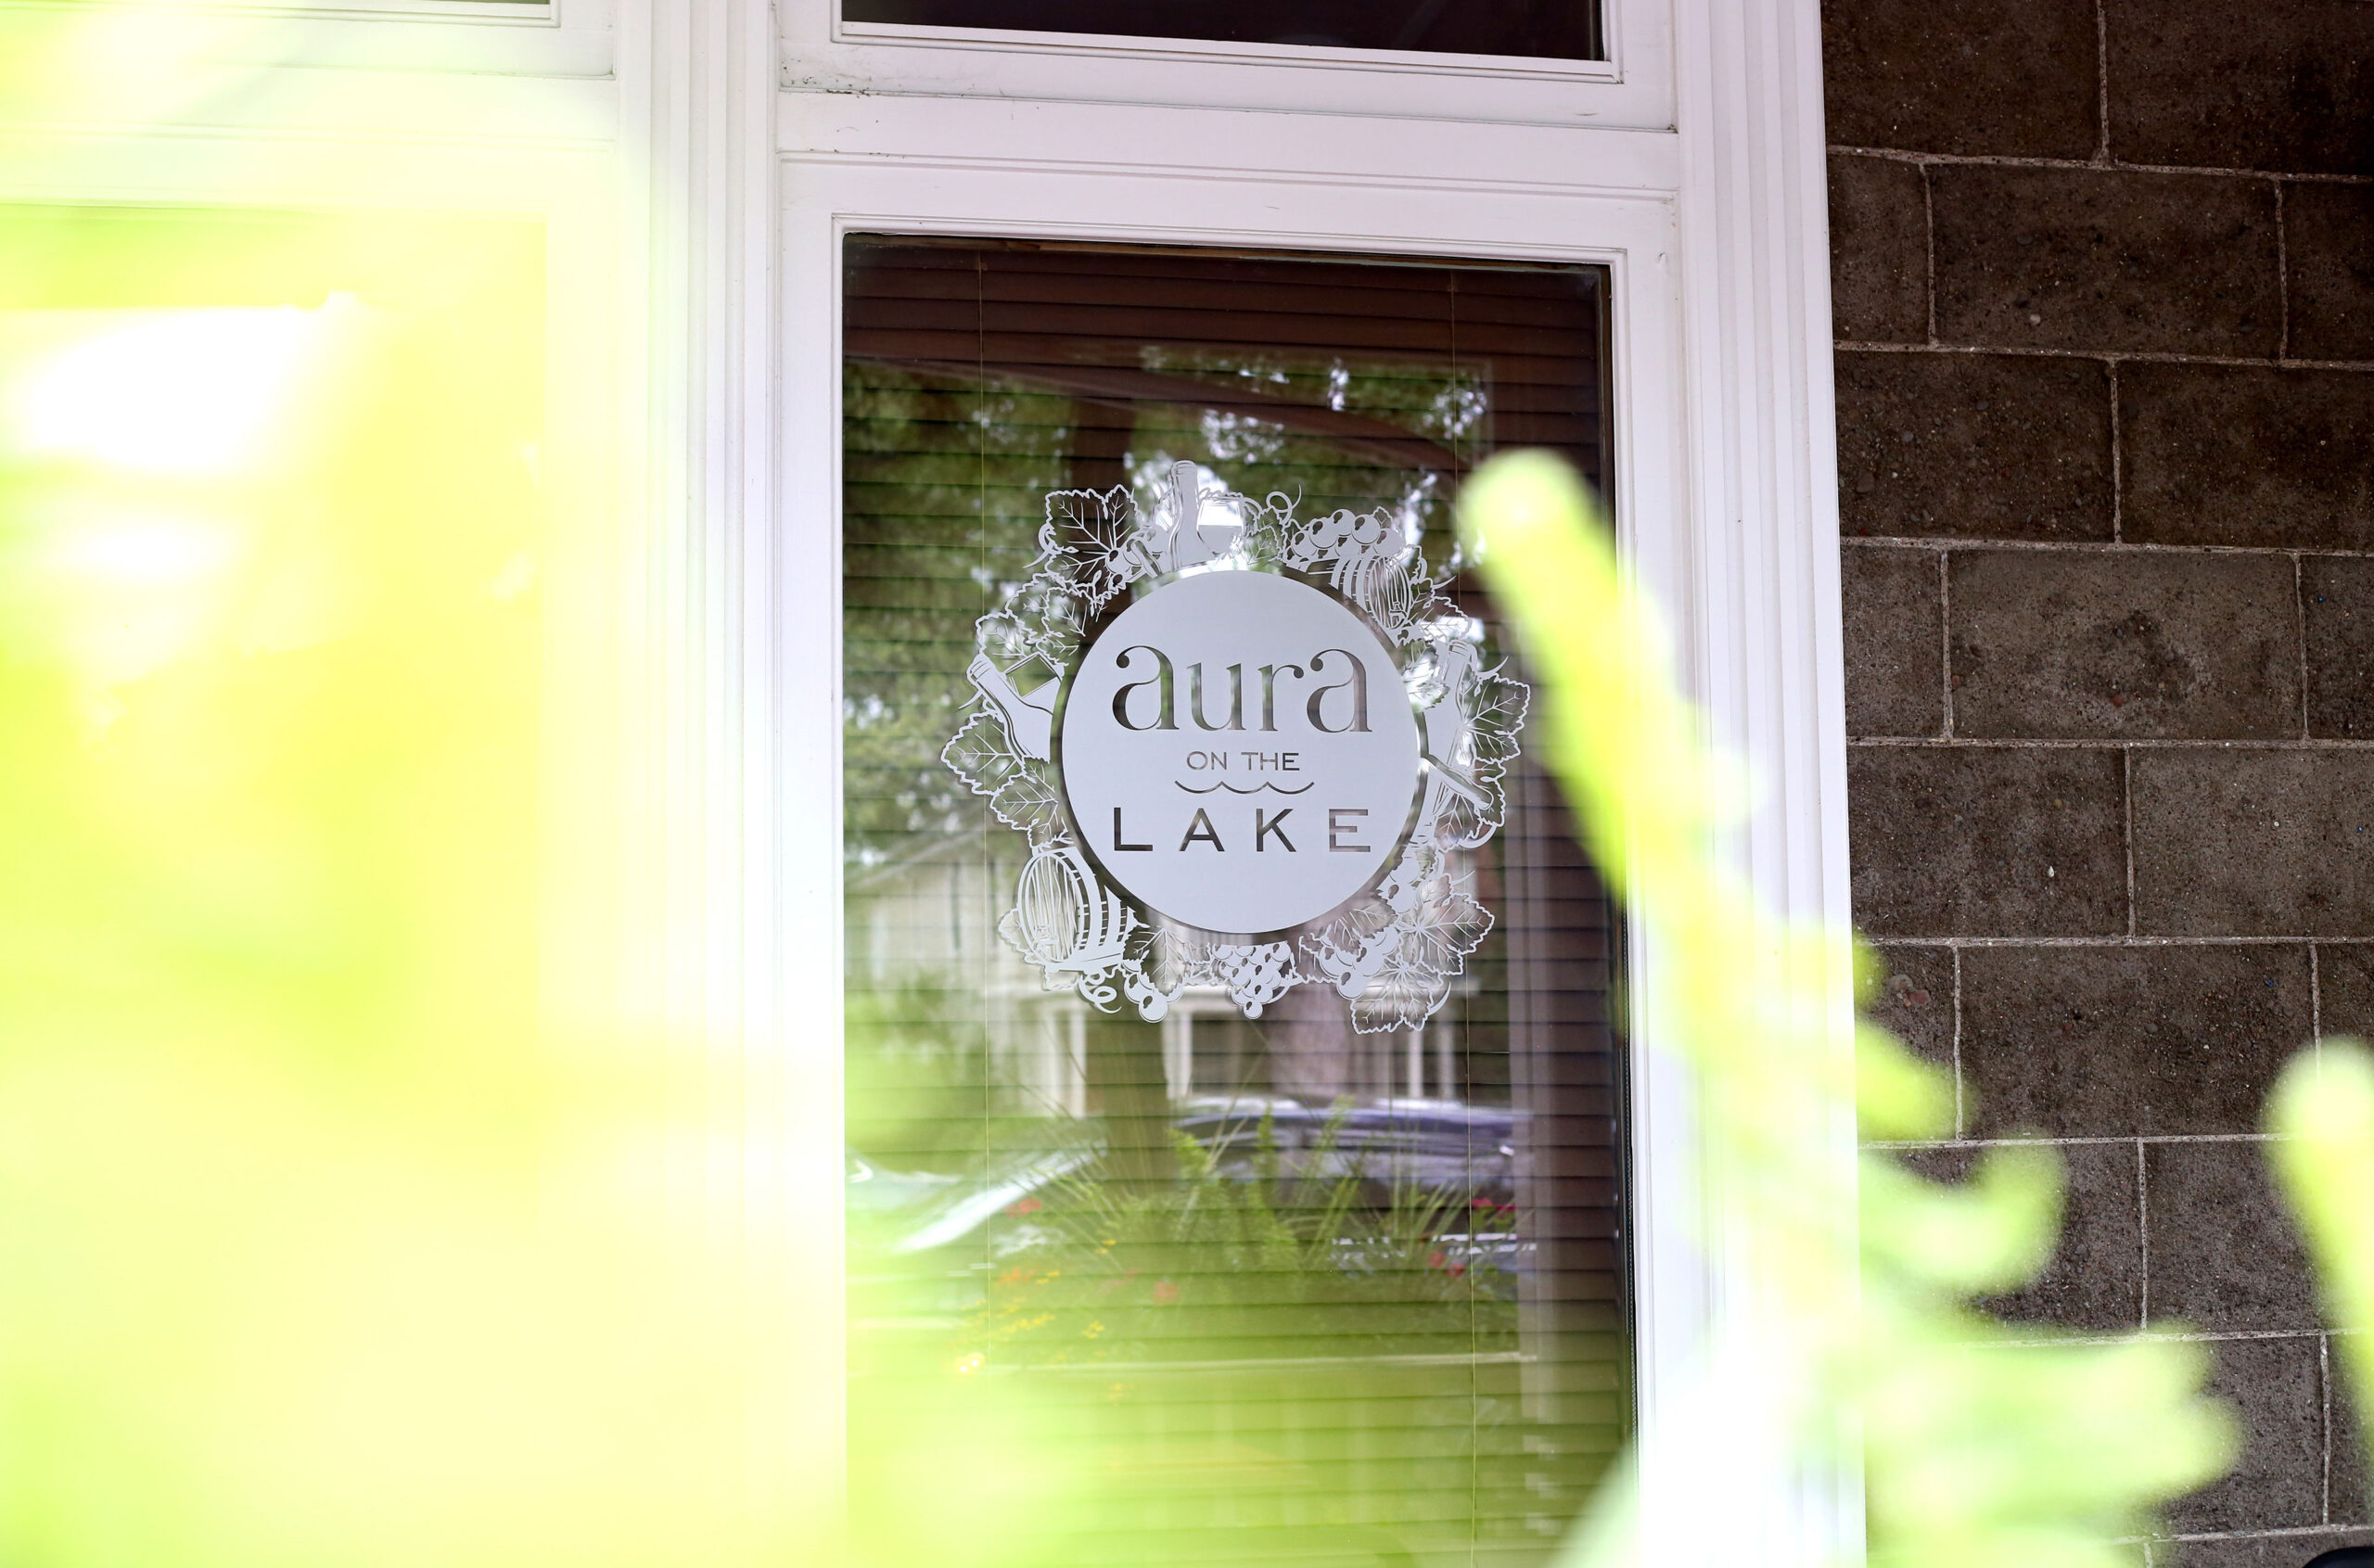 Aura on the Lake is Niagara-on-the-Lake's first Indian cuisine restaurant.